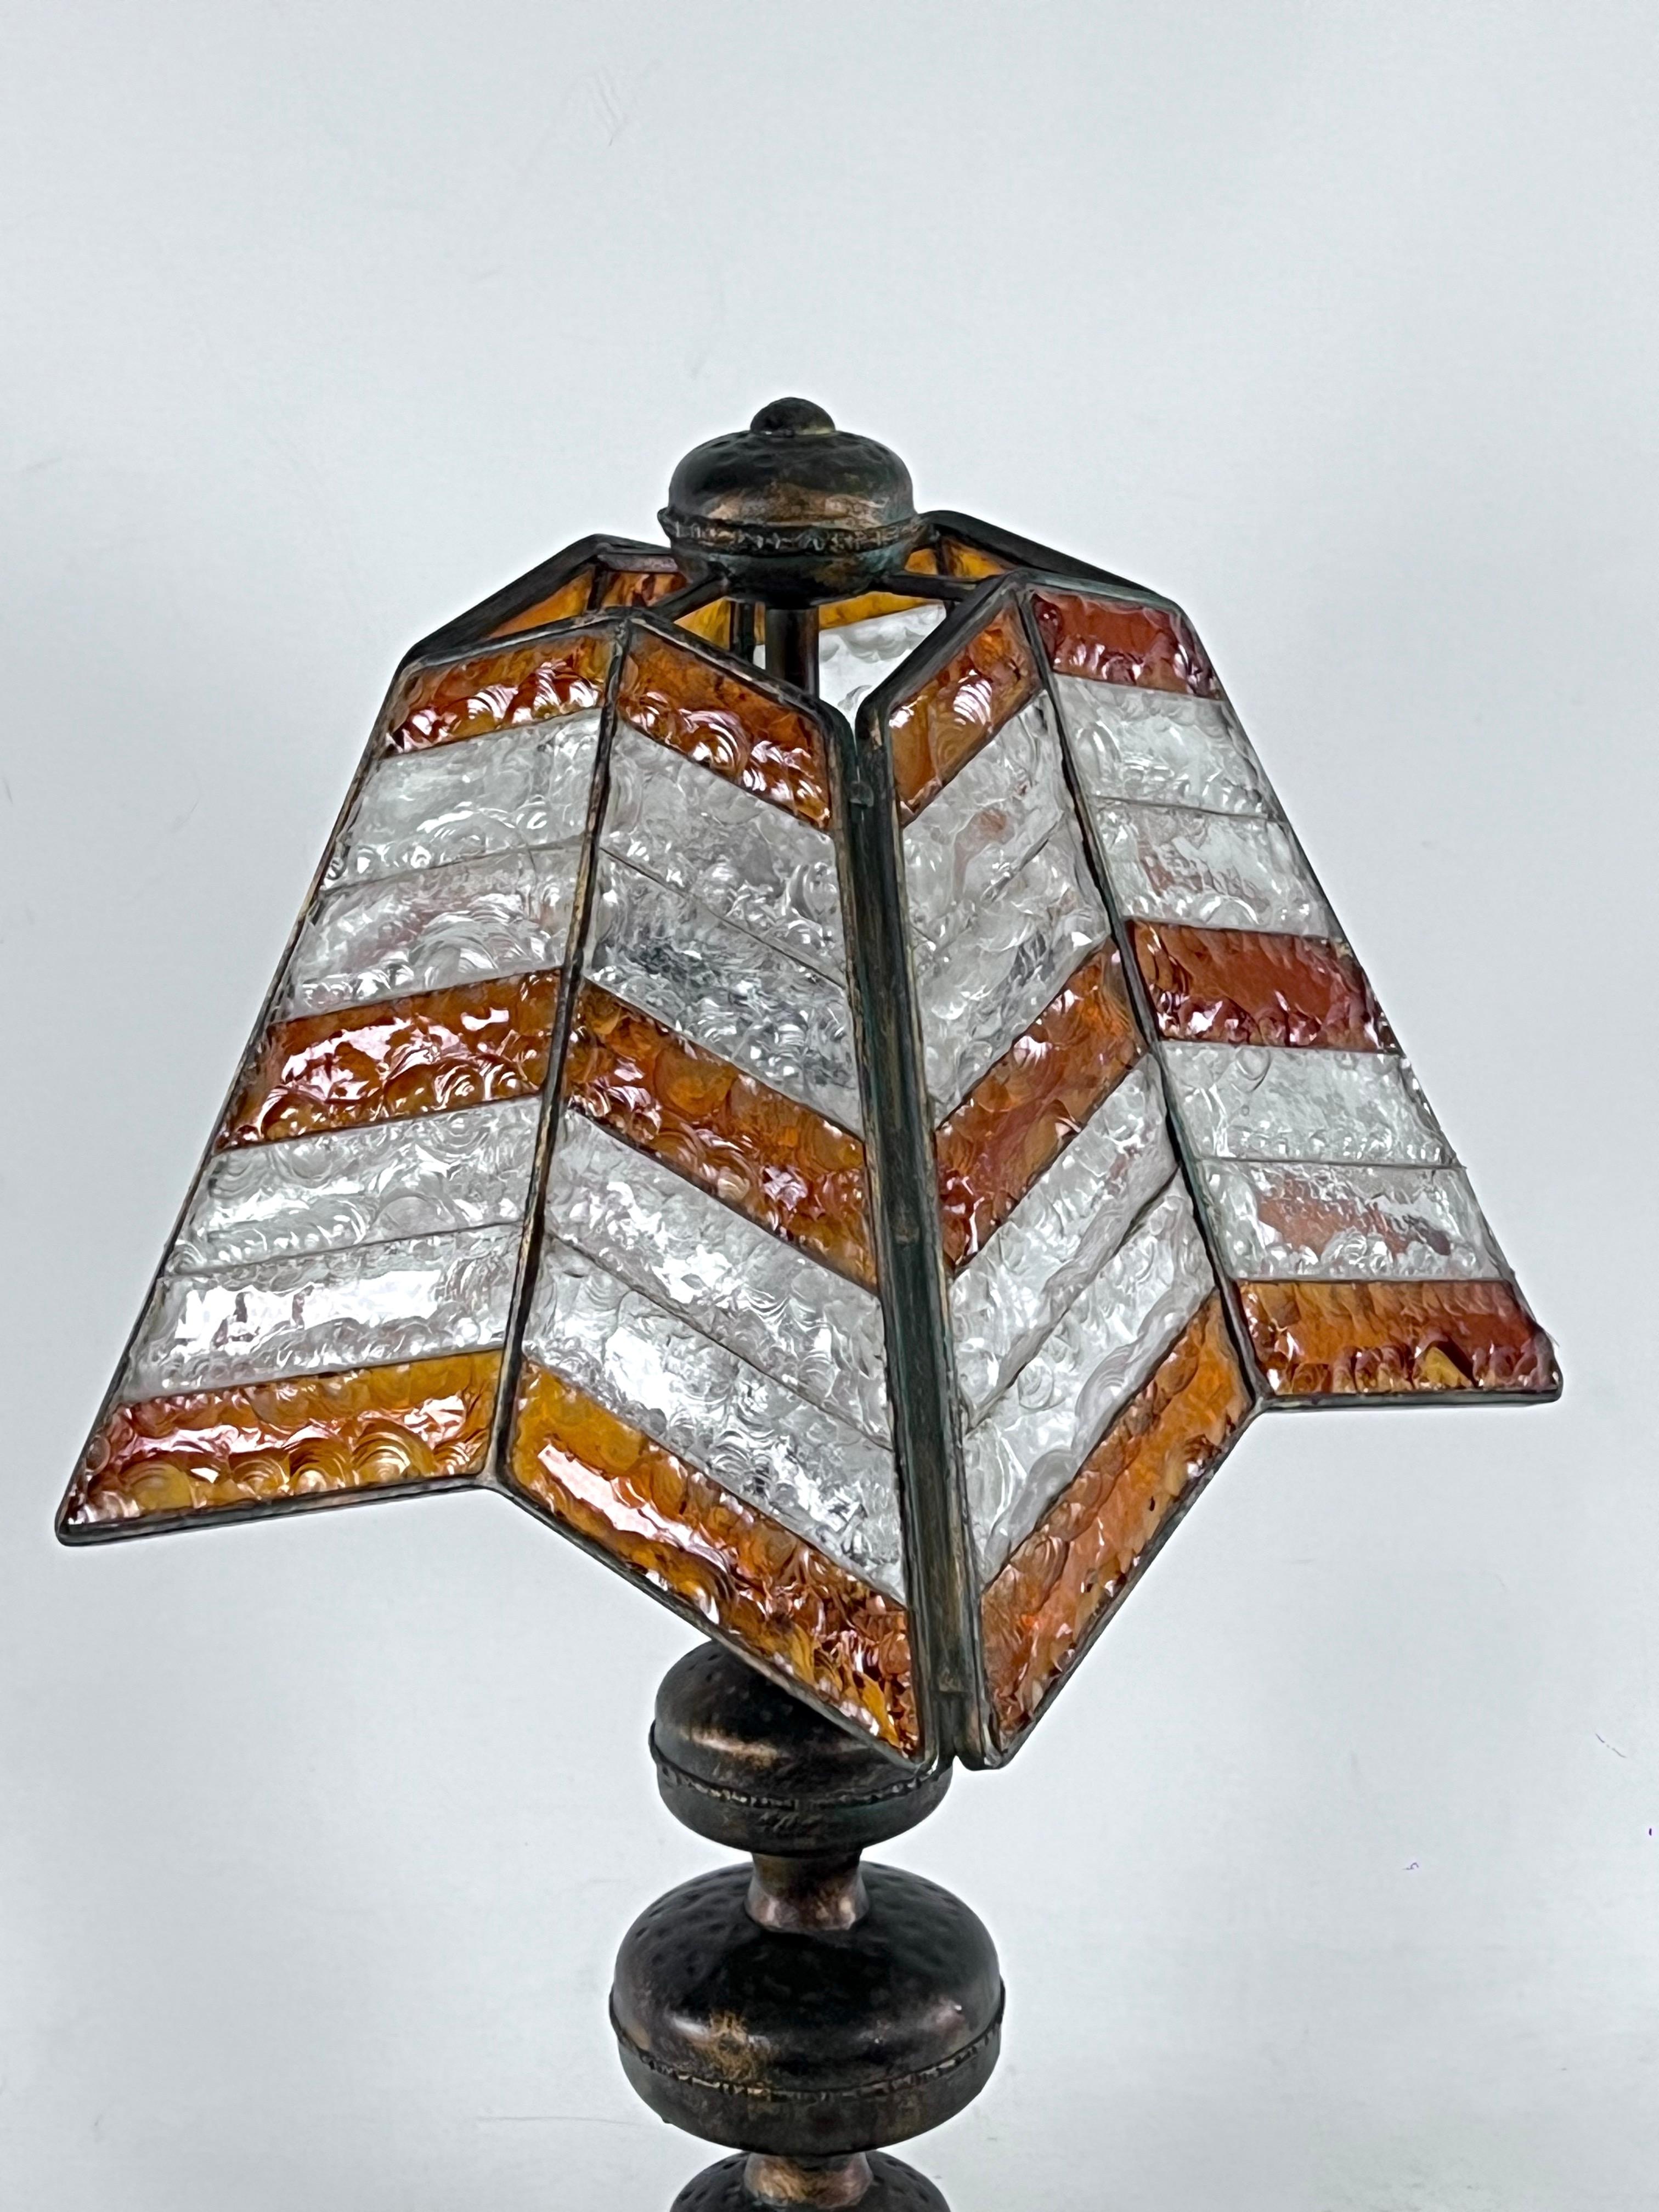 Italian Monumental Brutalist Thick Glass and Metal Table Lamp by Longobard, Italy, 1970s For Sale